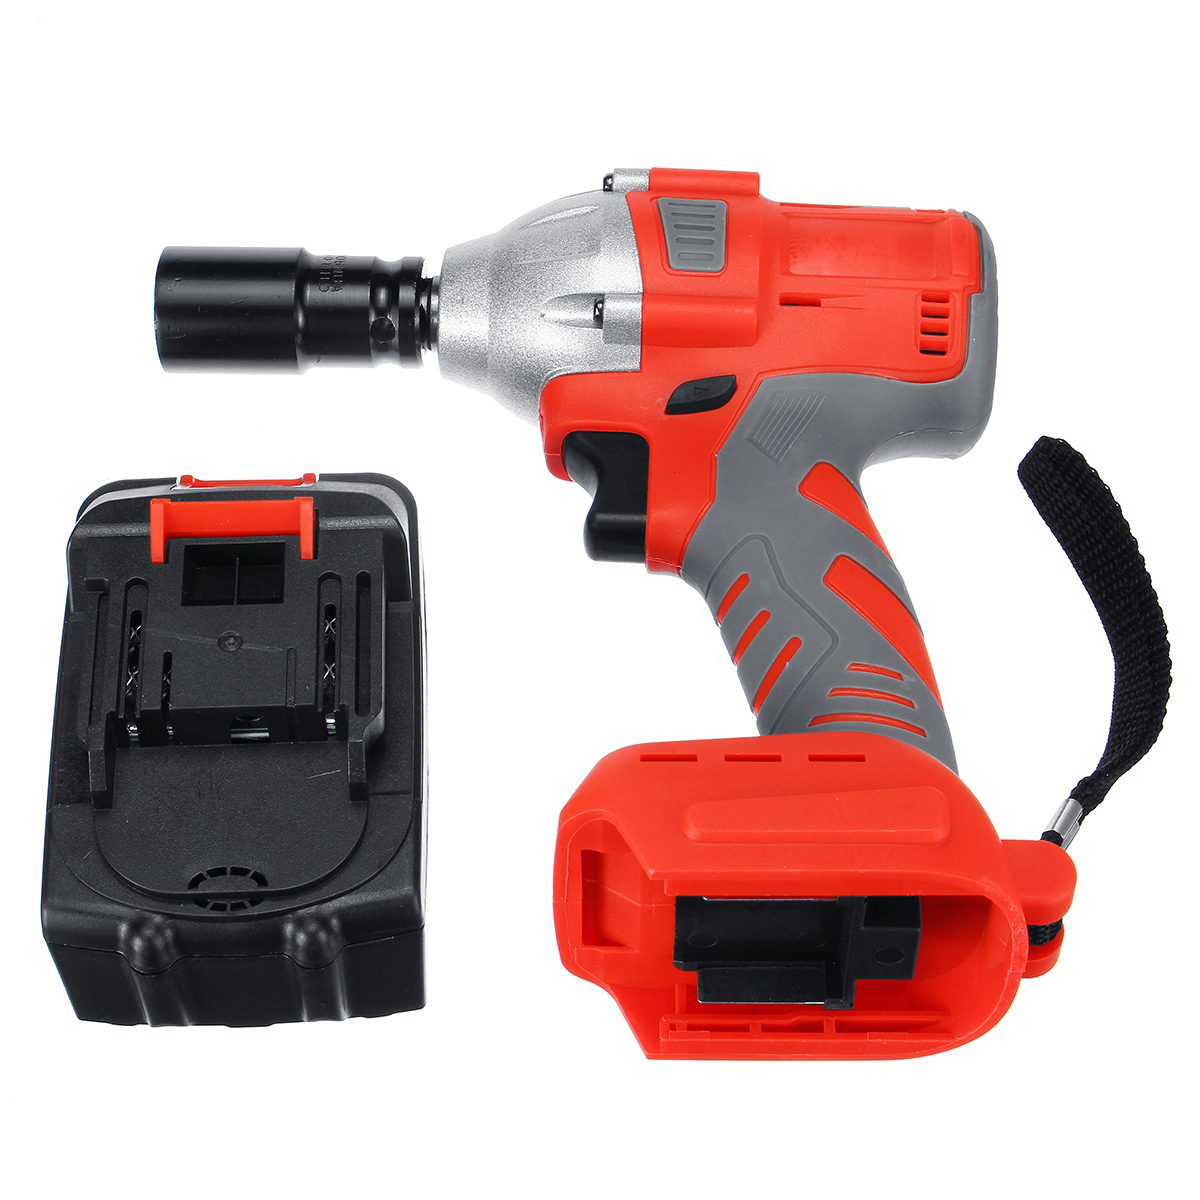 128VF188VF-Cordless-Rechargable-Brushless-Electric-Wrench-W-1or-2-Lithium-Battery-1431480-6